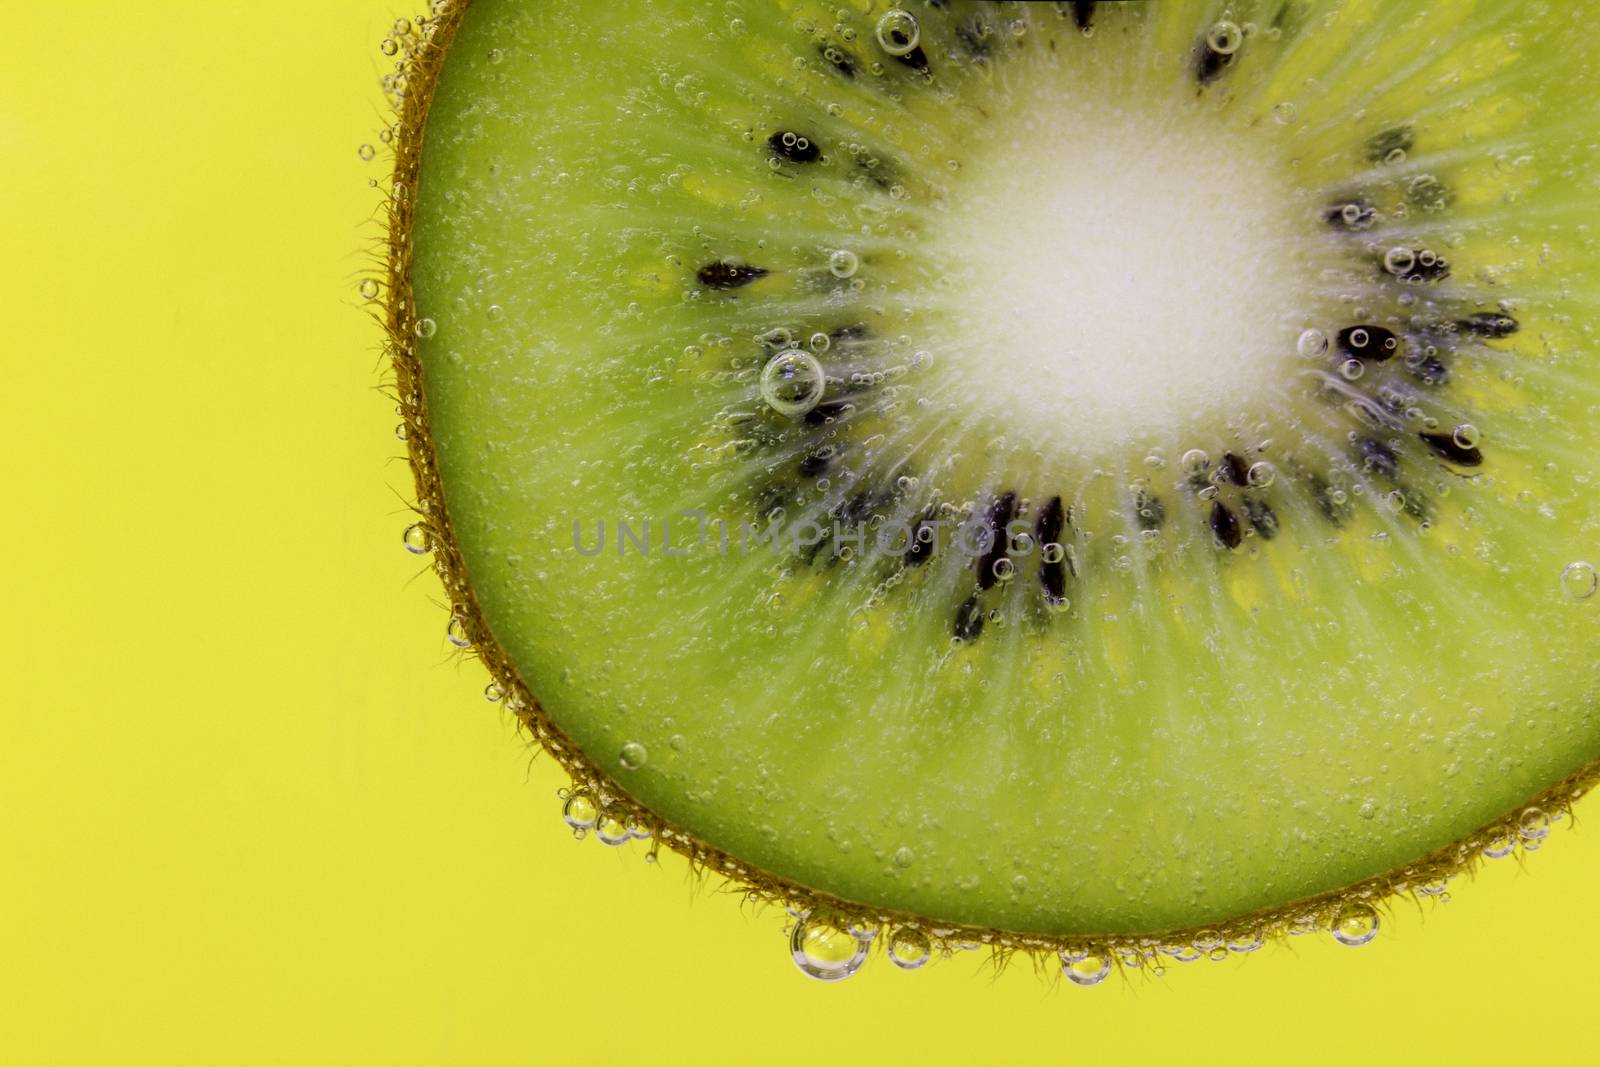 Closeup of a kiwi slice covered in water bubbles against a yellow background